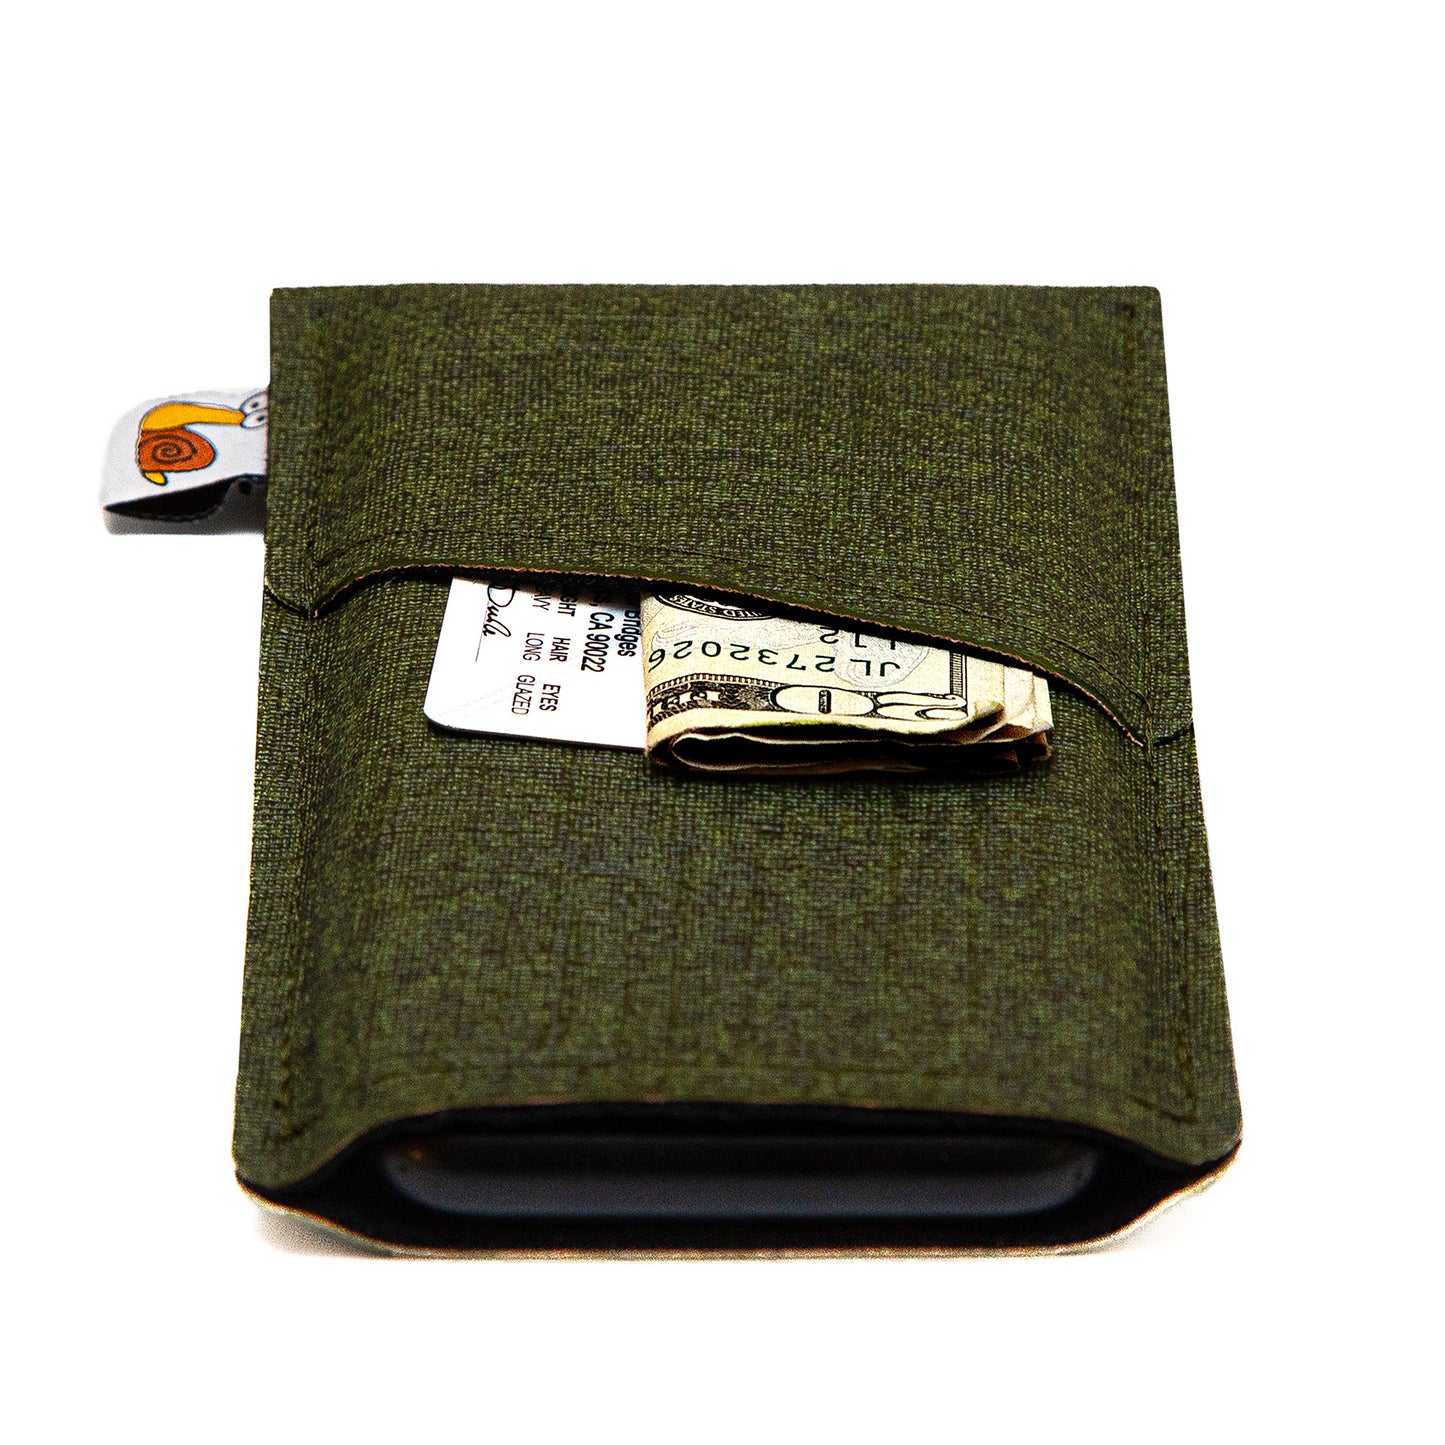 Modern Faux Leather iPhone Sleeve with Card Pocket – Olive Green